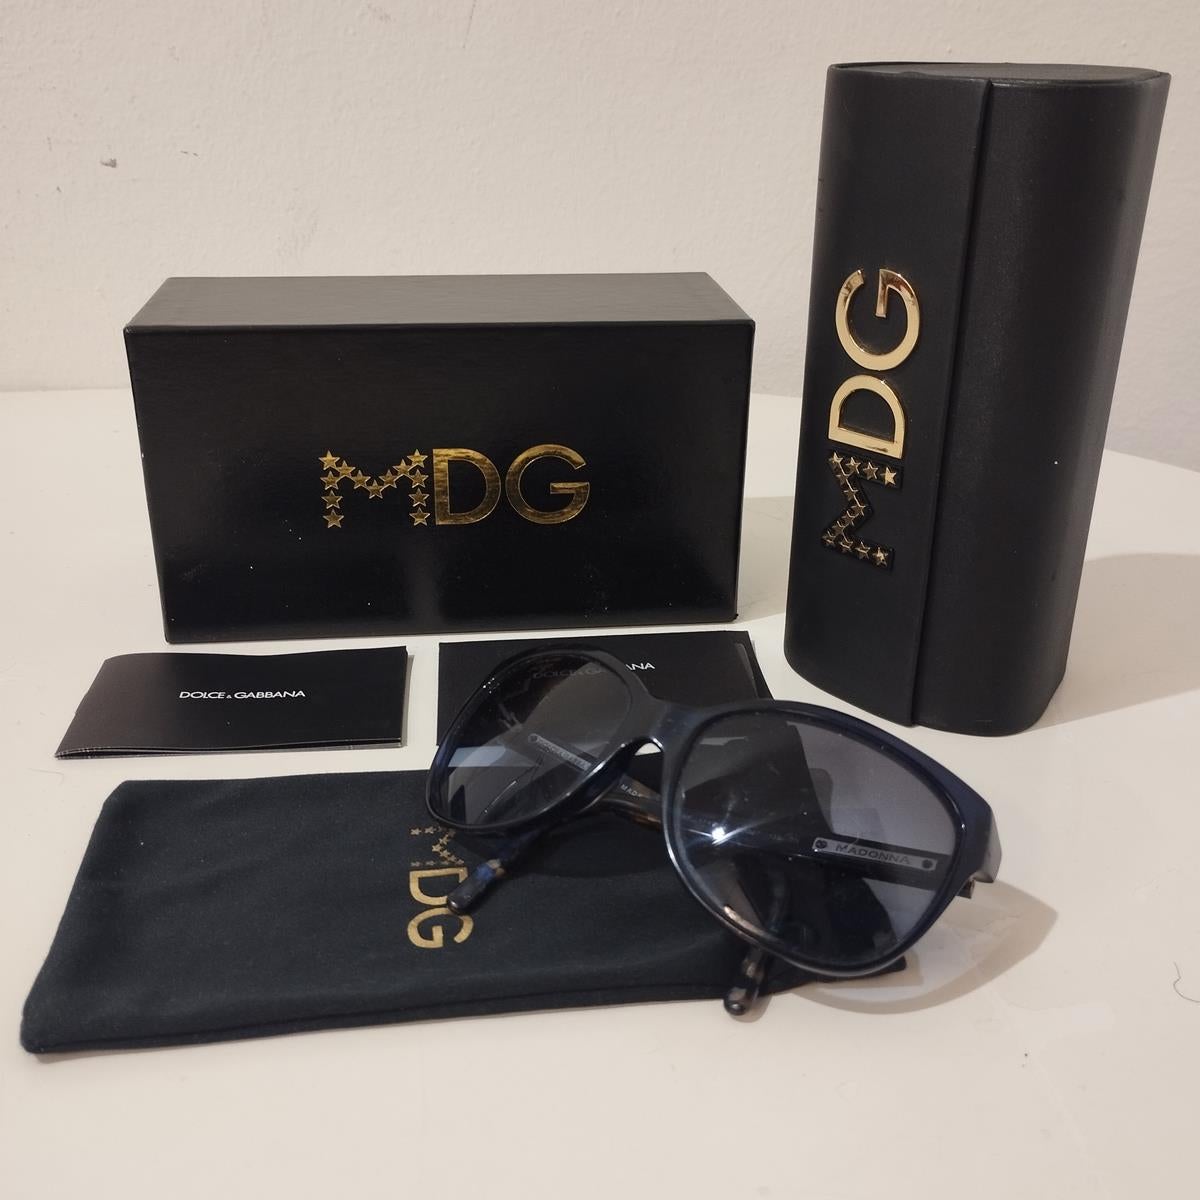 Special, limited and iconic DG sunglasses
Madonna Special Edition
DG 4097
Blue frames
Blue lenses (multiple signs on them)
Frame width cm 13,5 (5,3 inches)
With case and box
Fast shipping from Italy